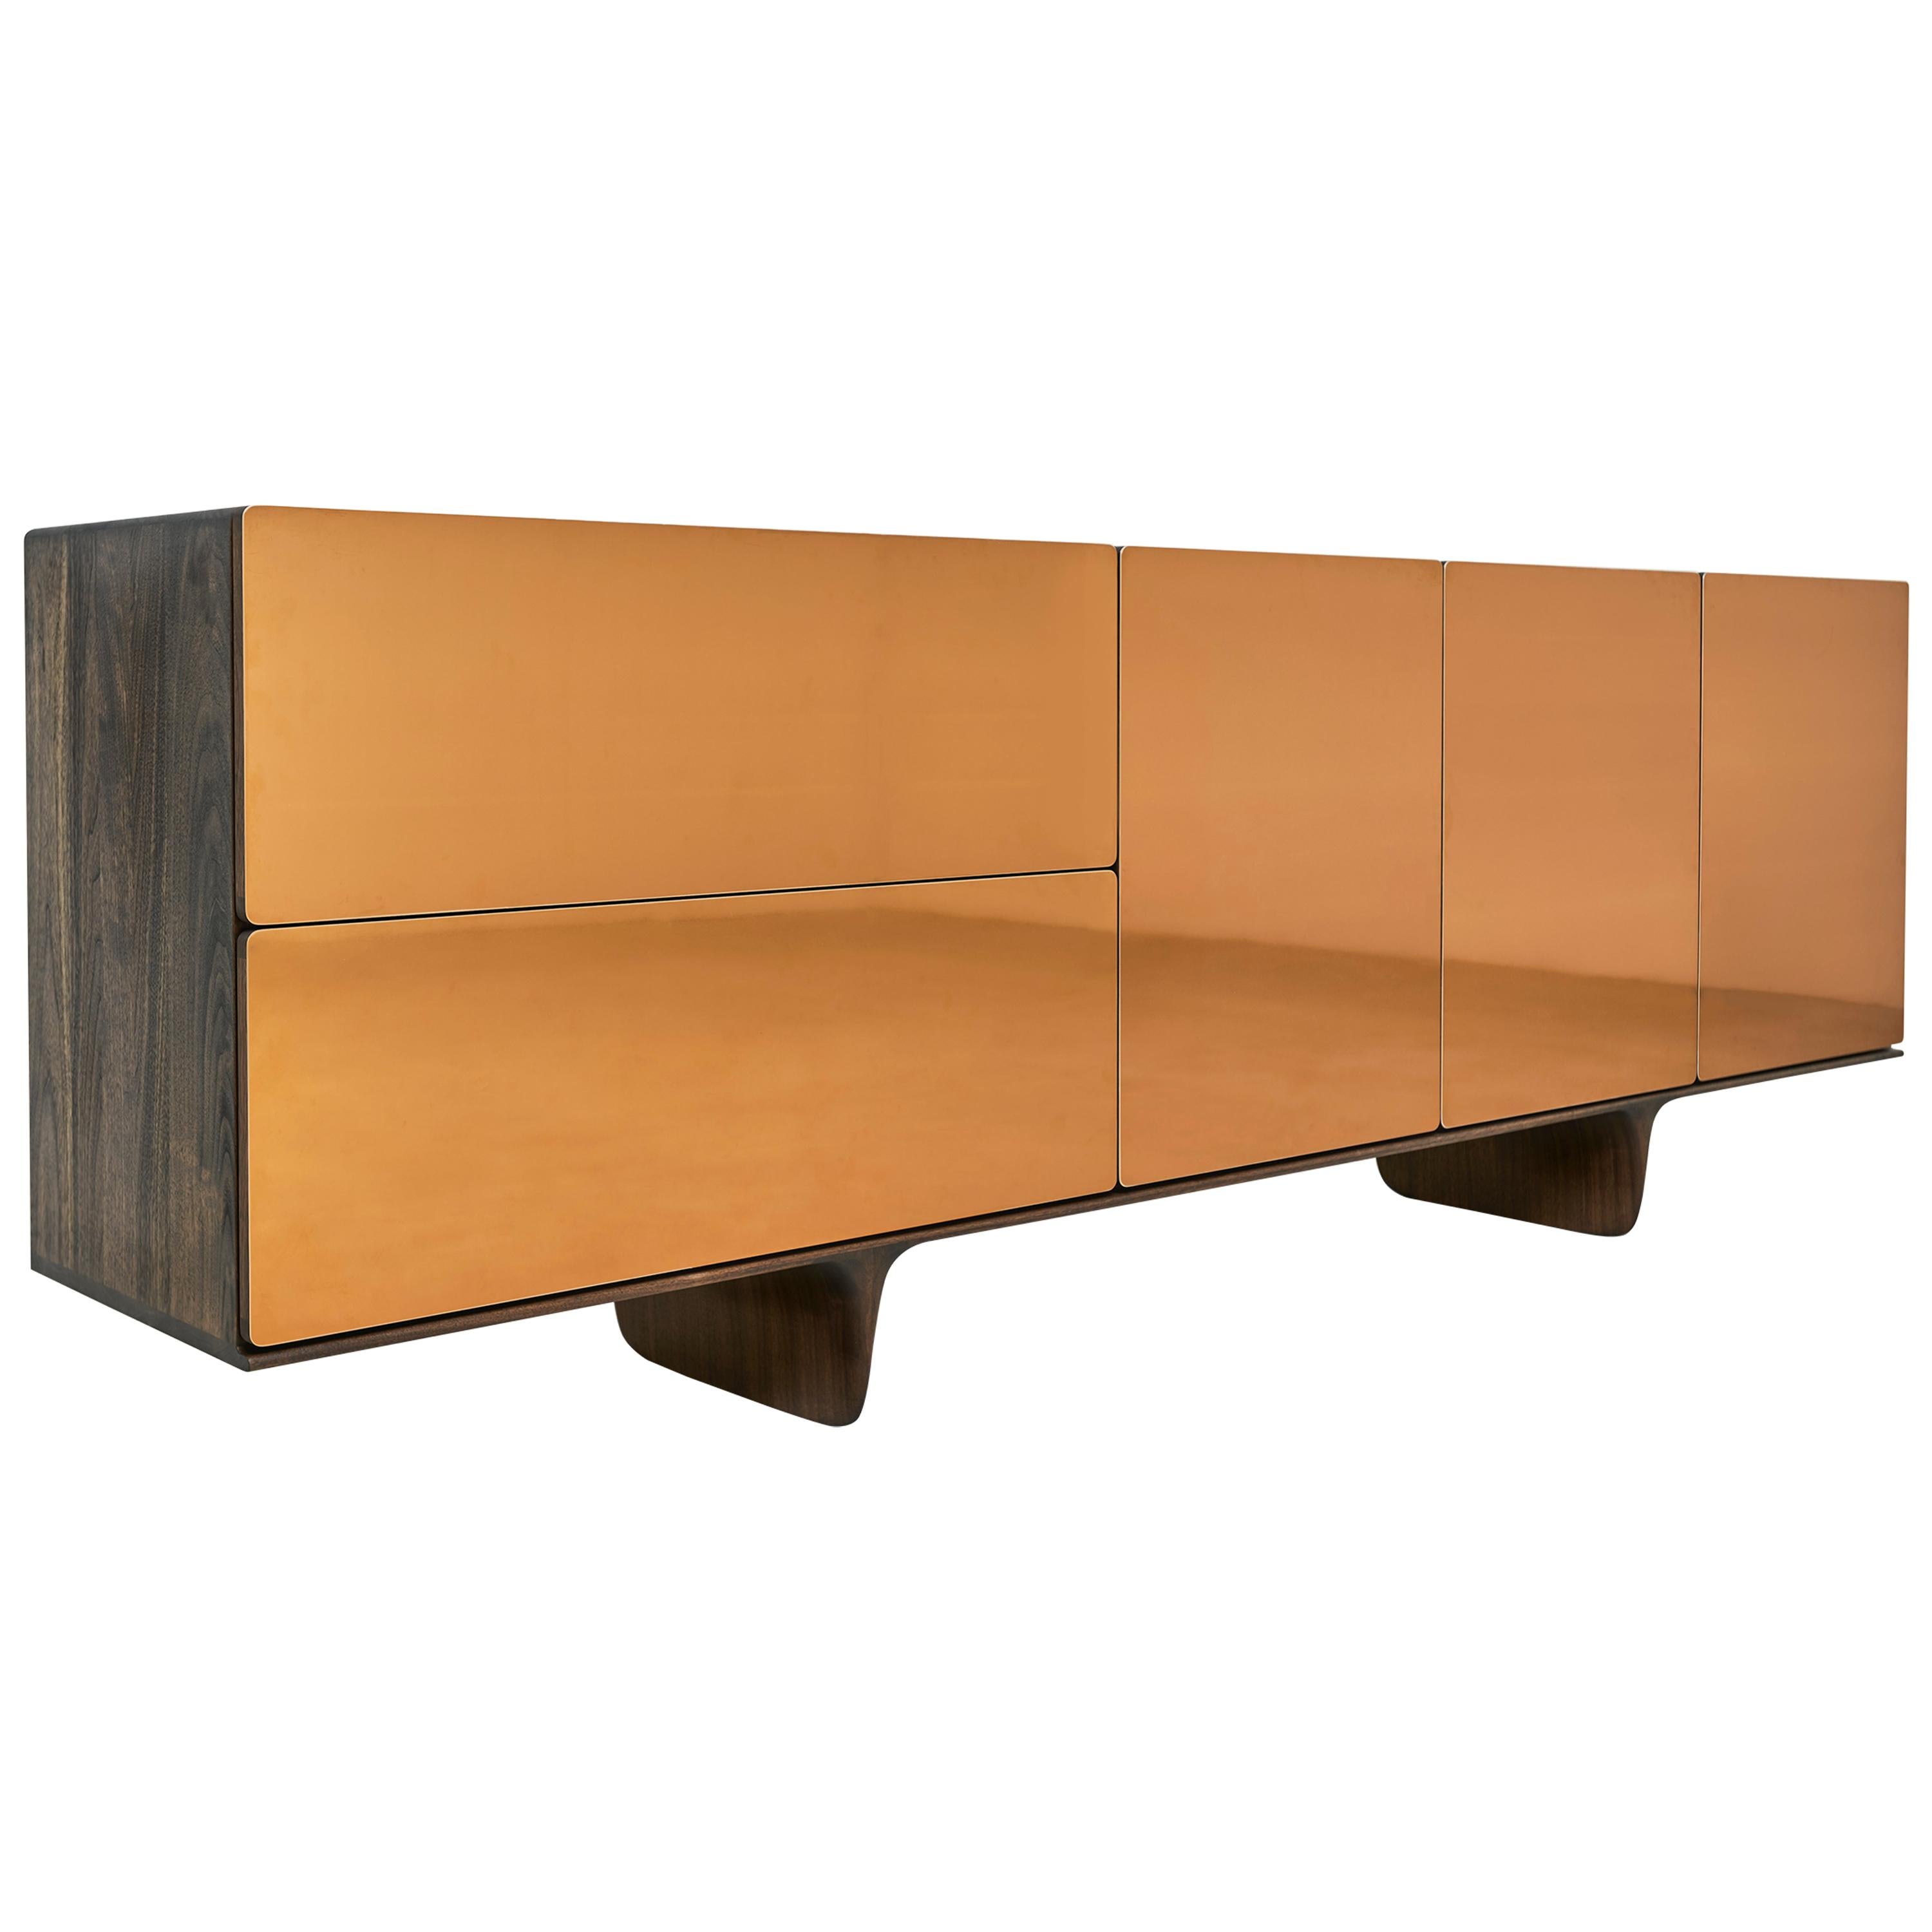 Arca Solid Hardwood Cabinet with Bronze Faces by Izm Design